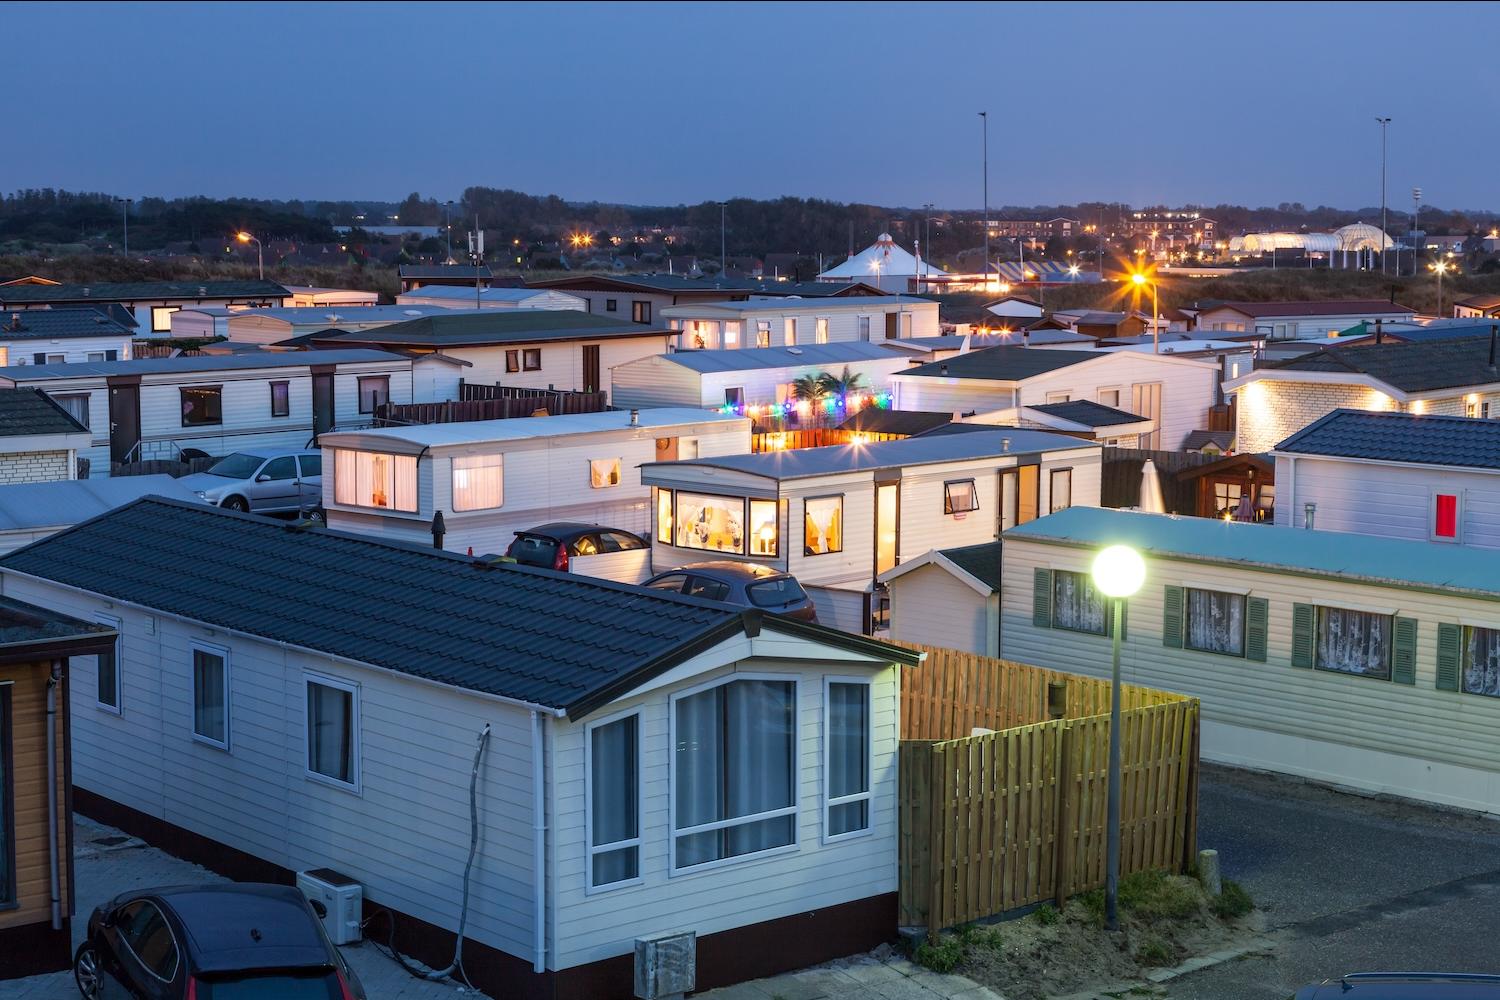 mobile homes in a mobile home park at sunset - mobile home owners are forming mobile home co-ops for climate resilience